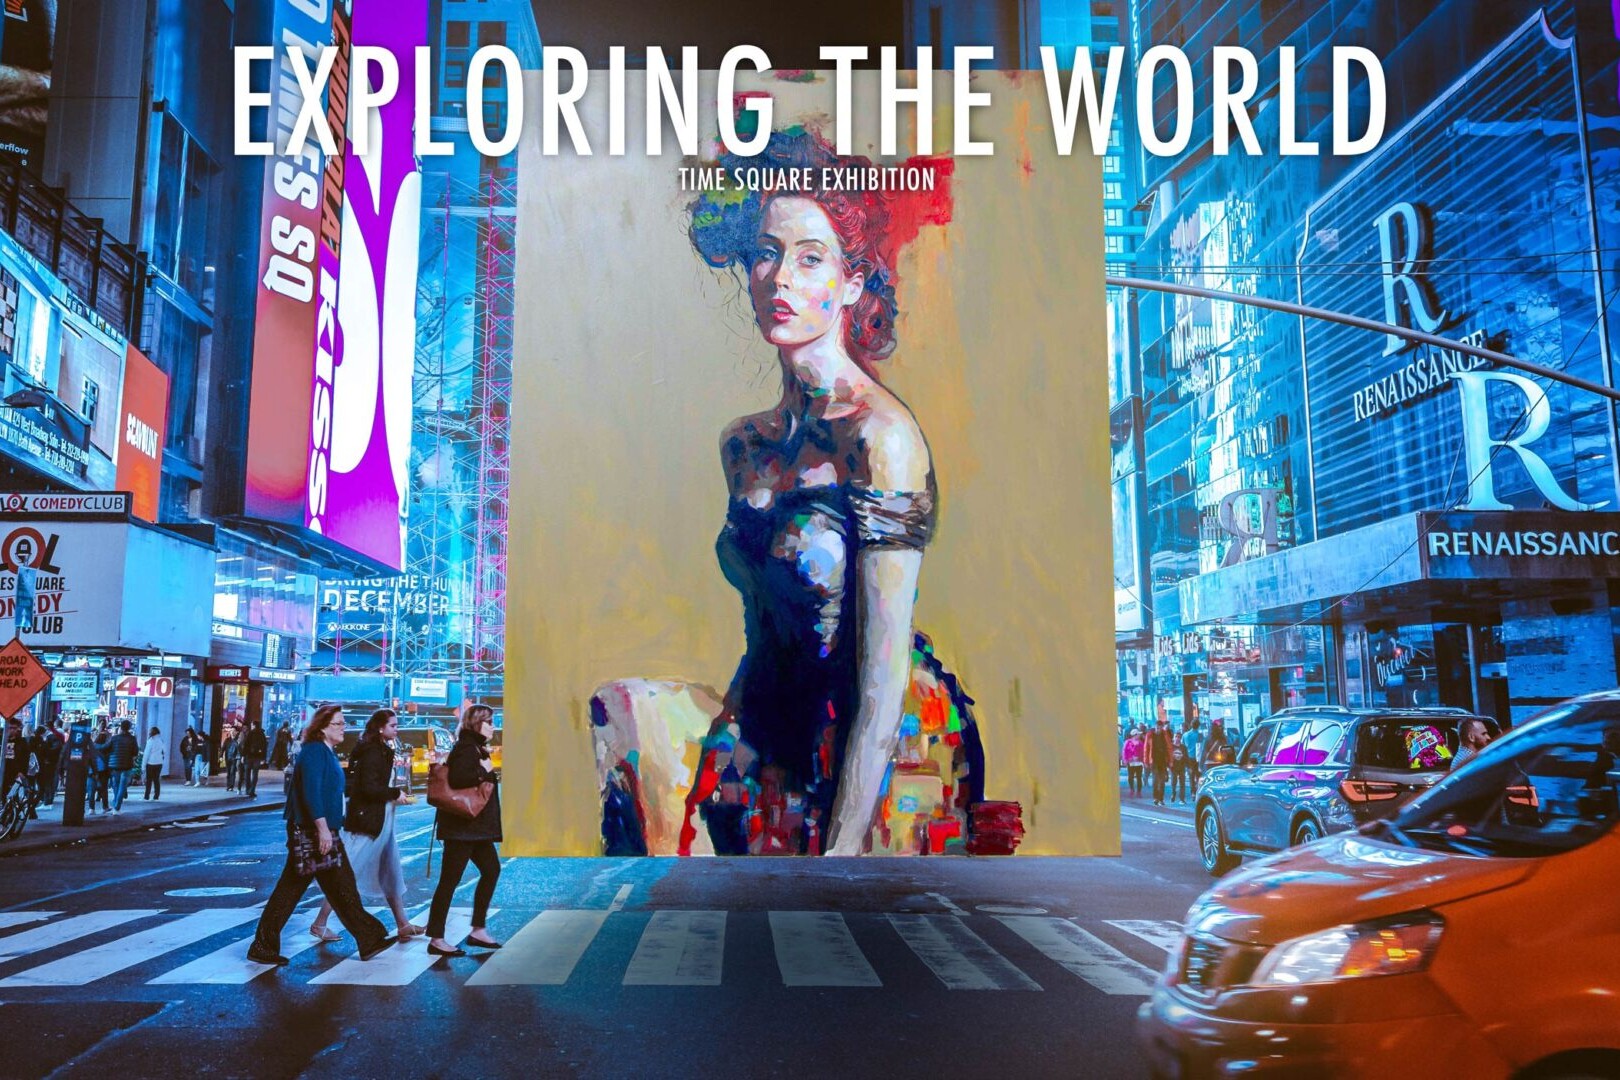 A vibrant and colorful artwork displayed on a large digital screen in the midst of Times Square.